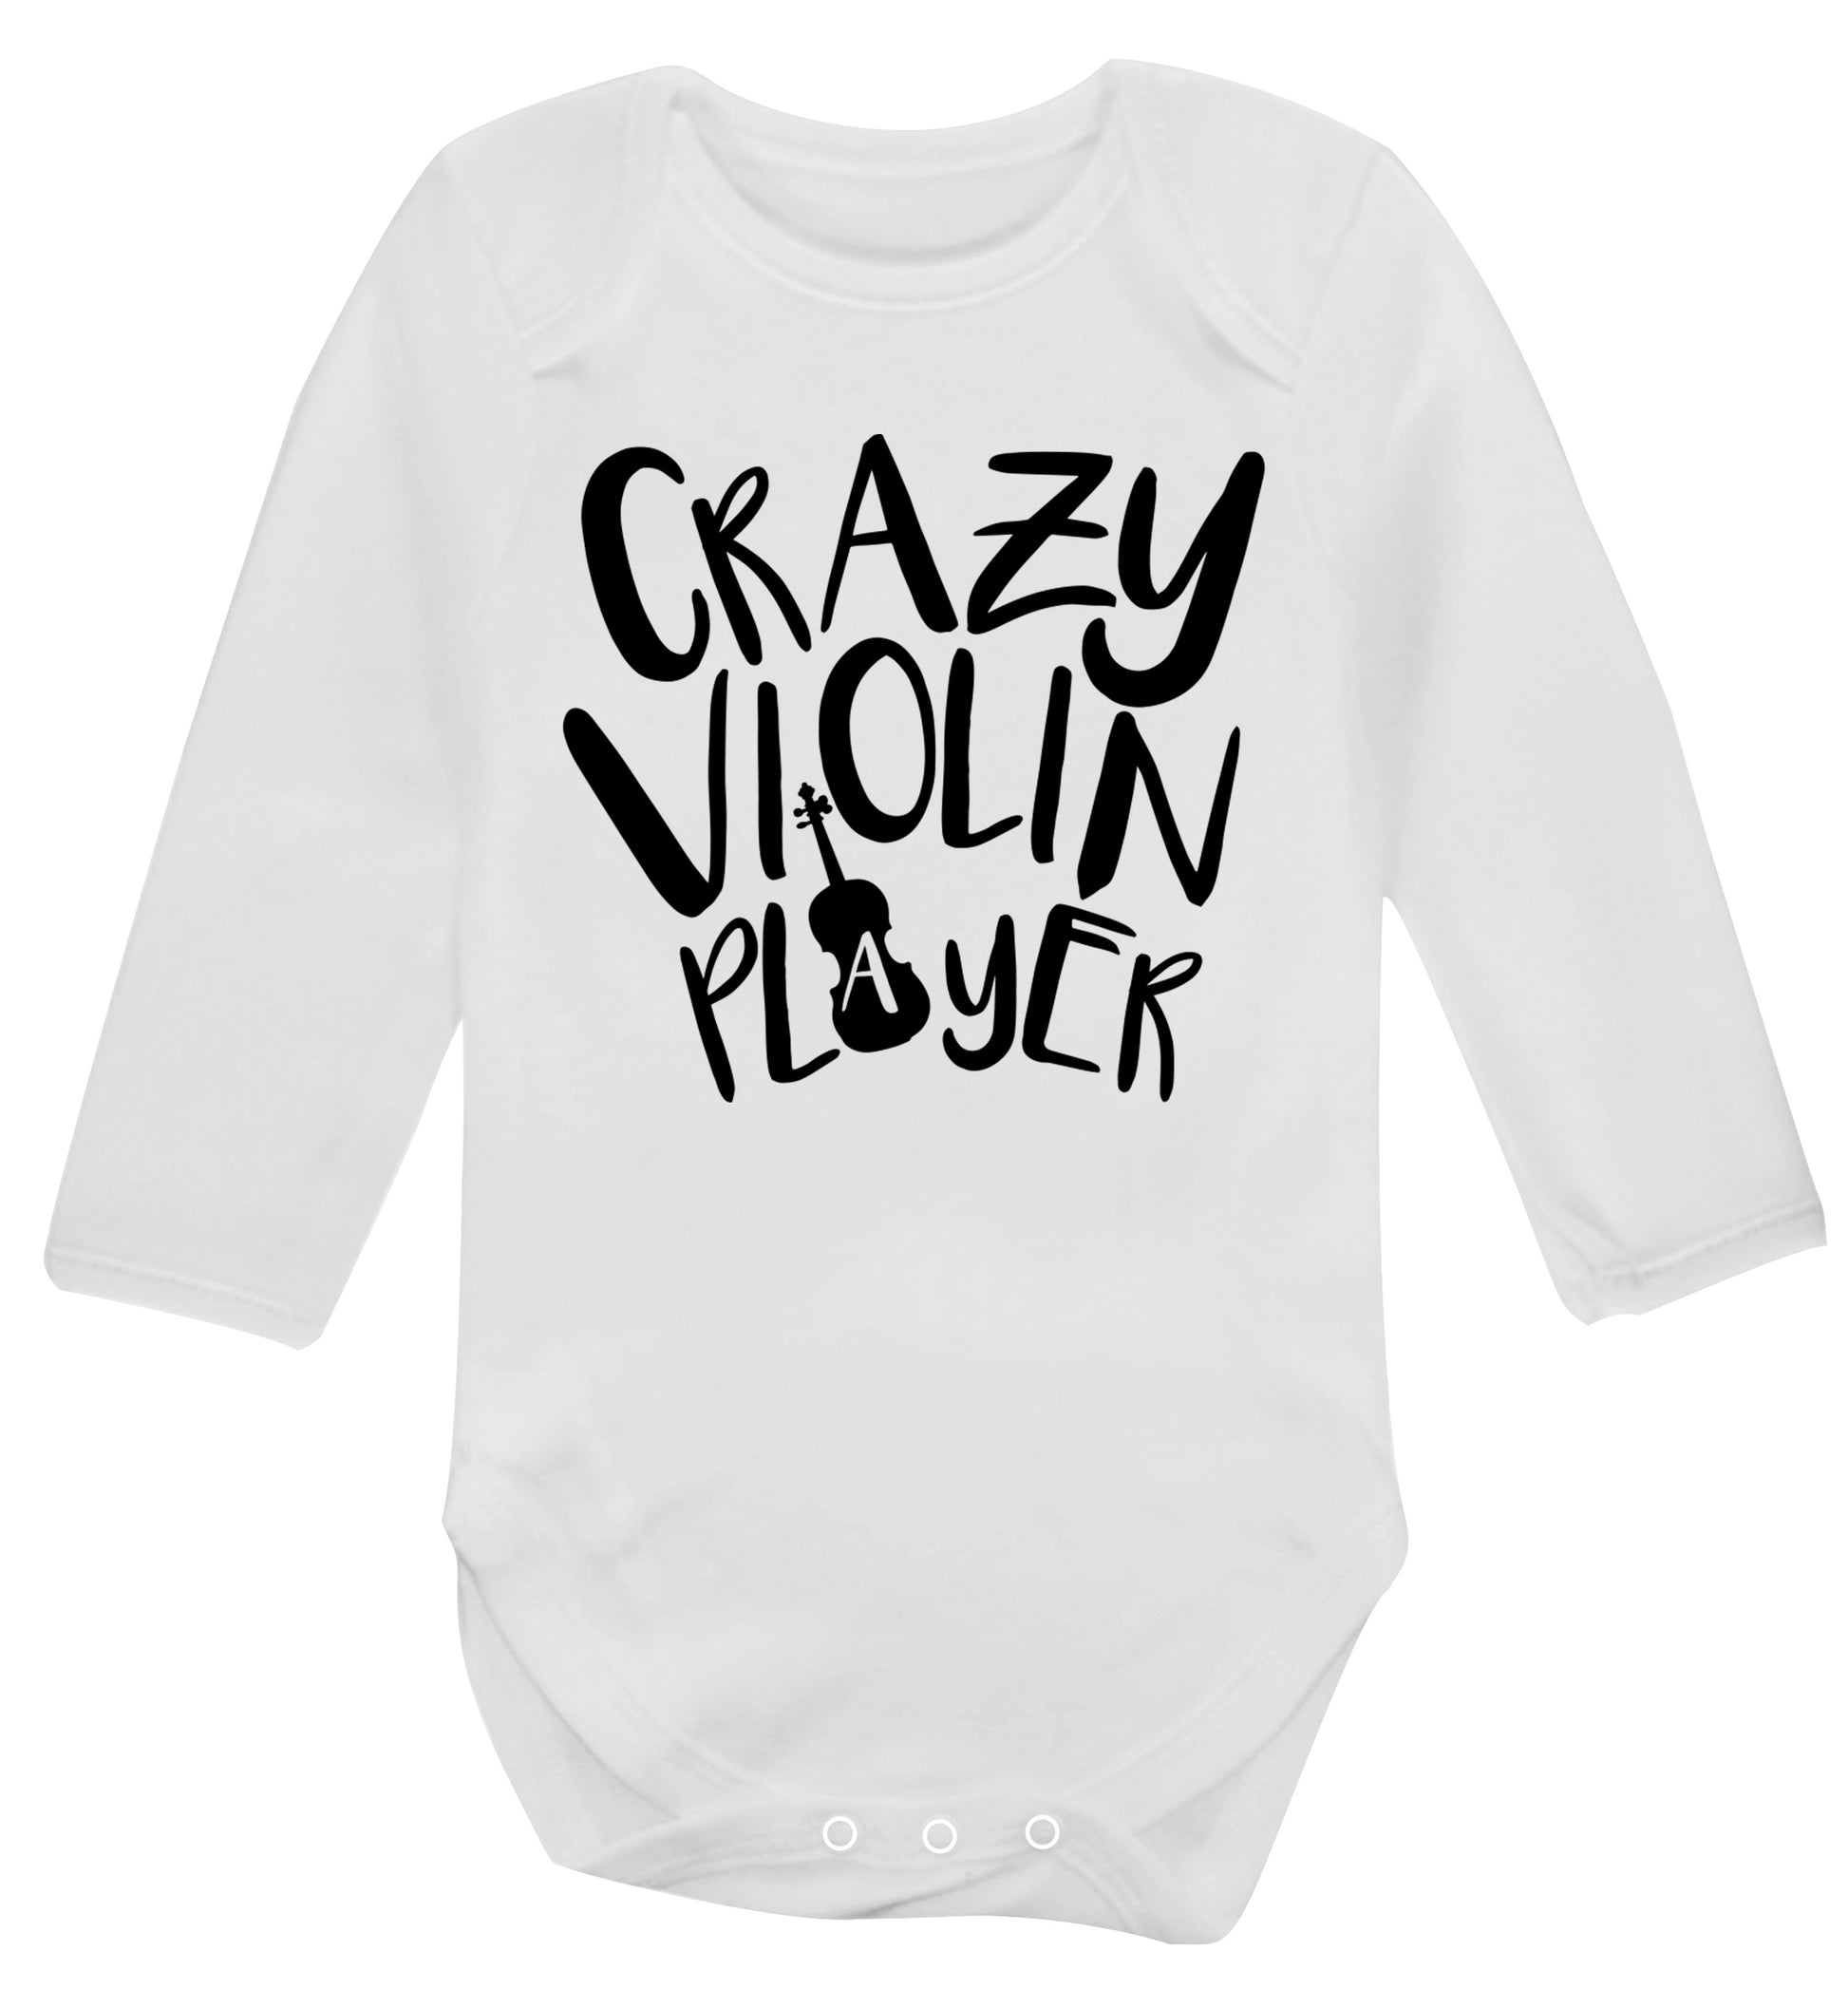 Crazy Violin Player Baby Vest long sleeved white 6-12 months